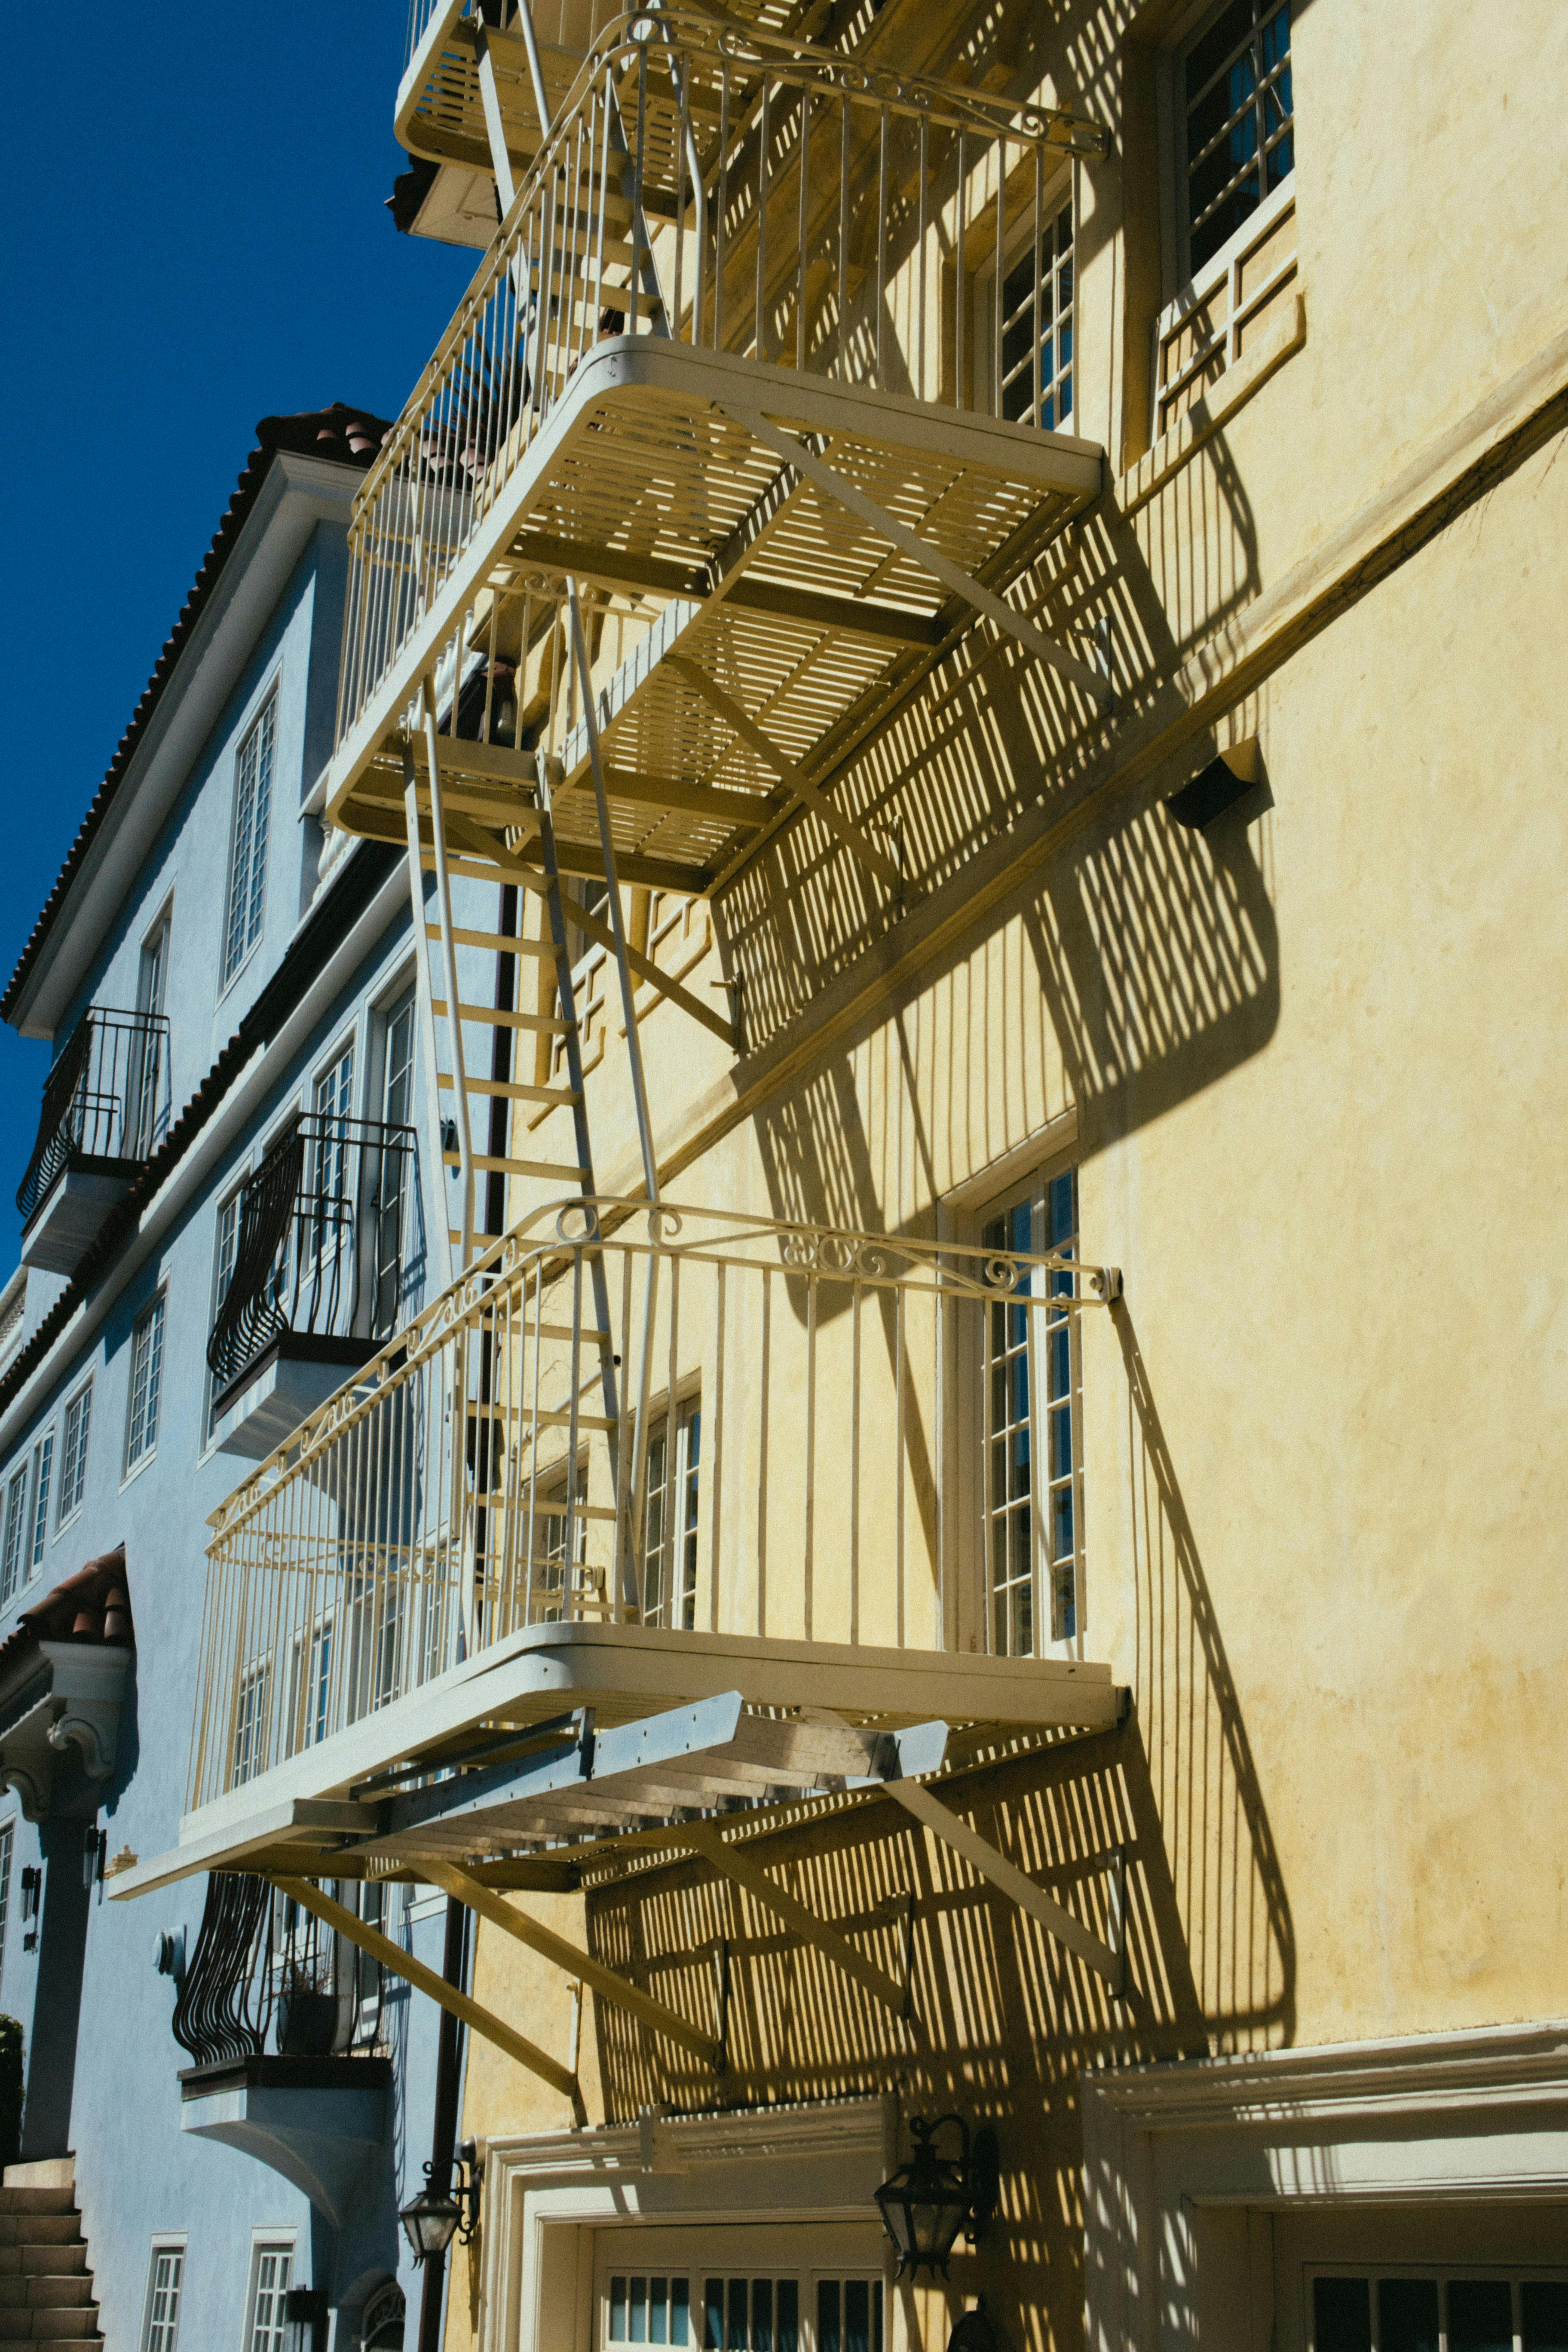 Balcony Of A Building For Fire Escape · Free Stock Photo